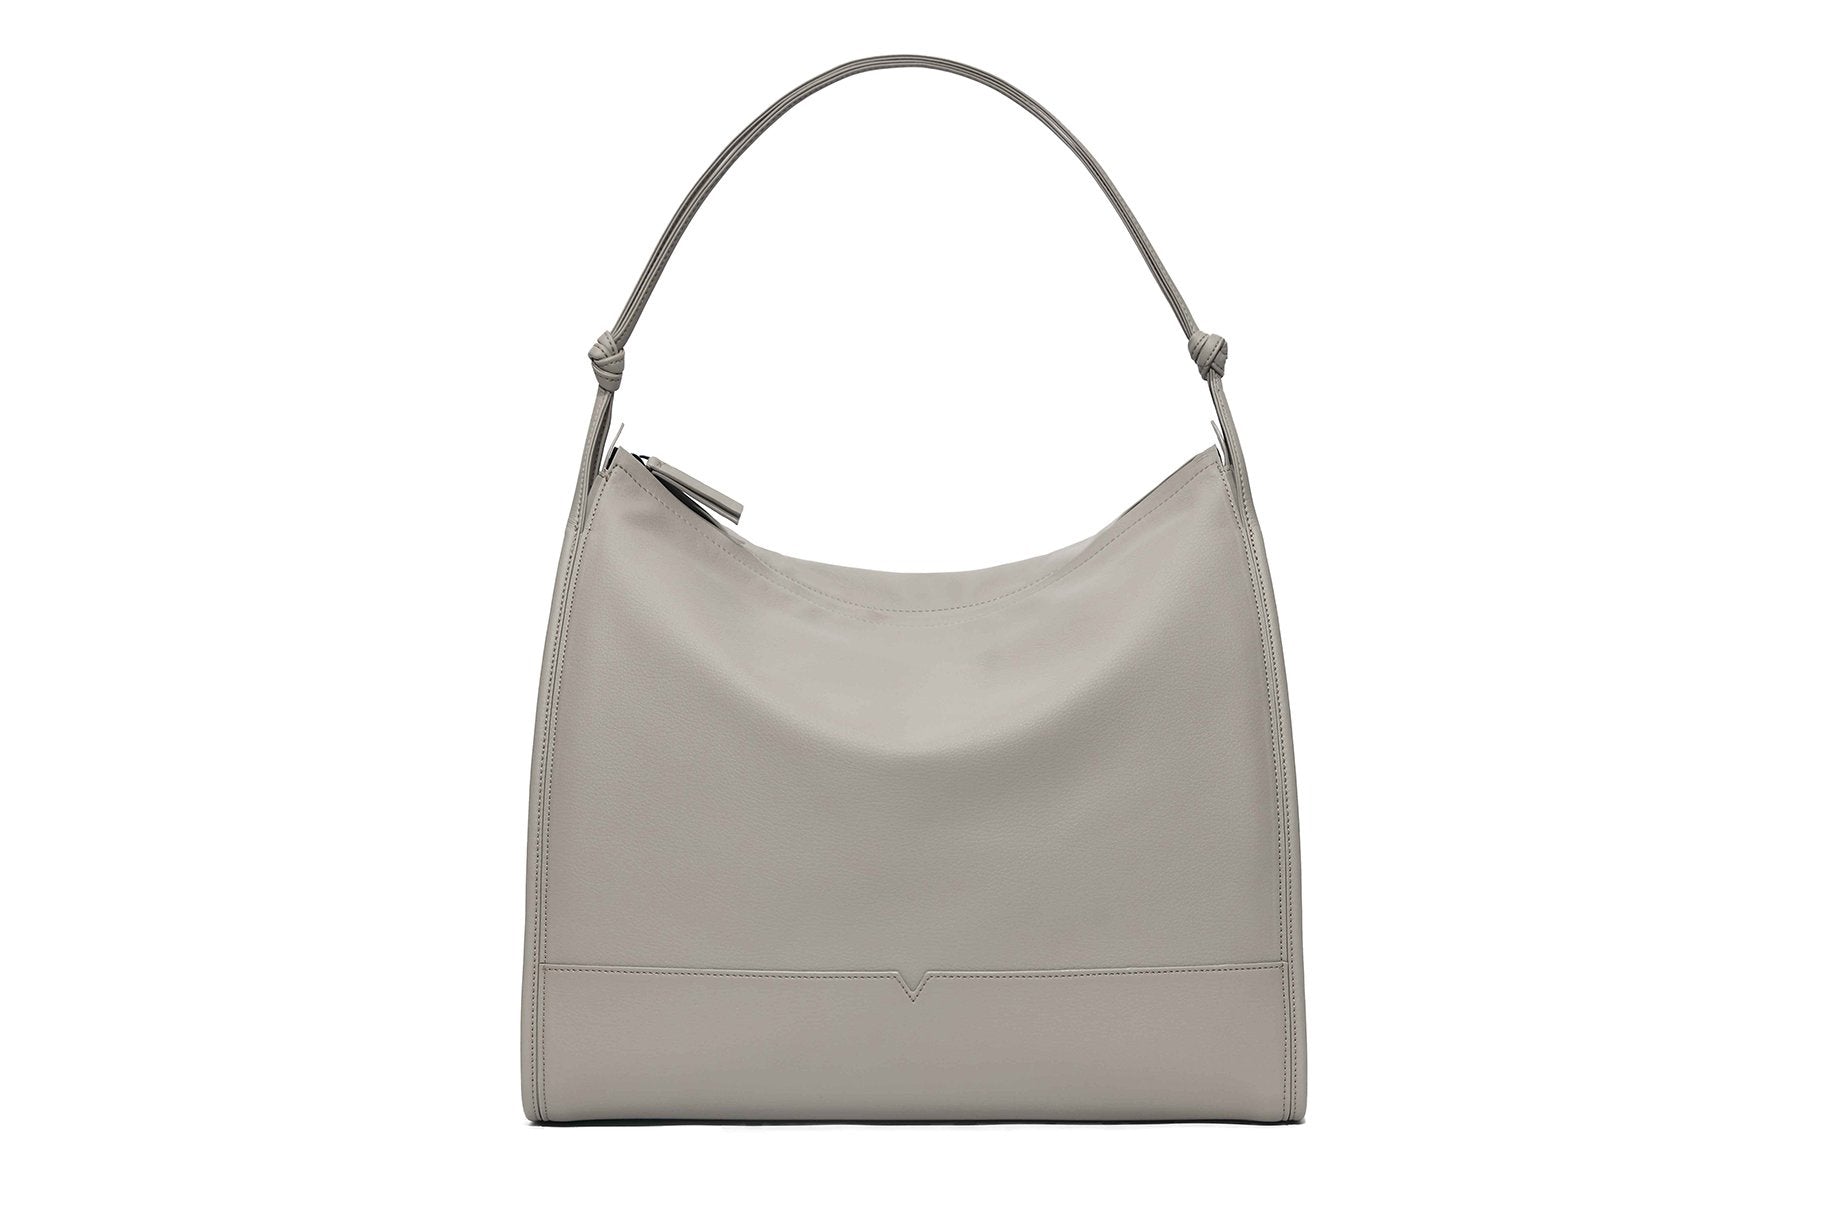 The Shoulder Bag in Banbū Leather in Stone image 1